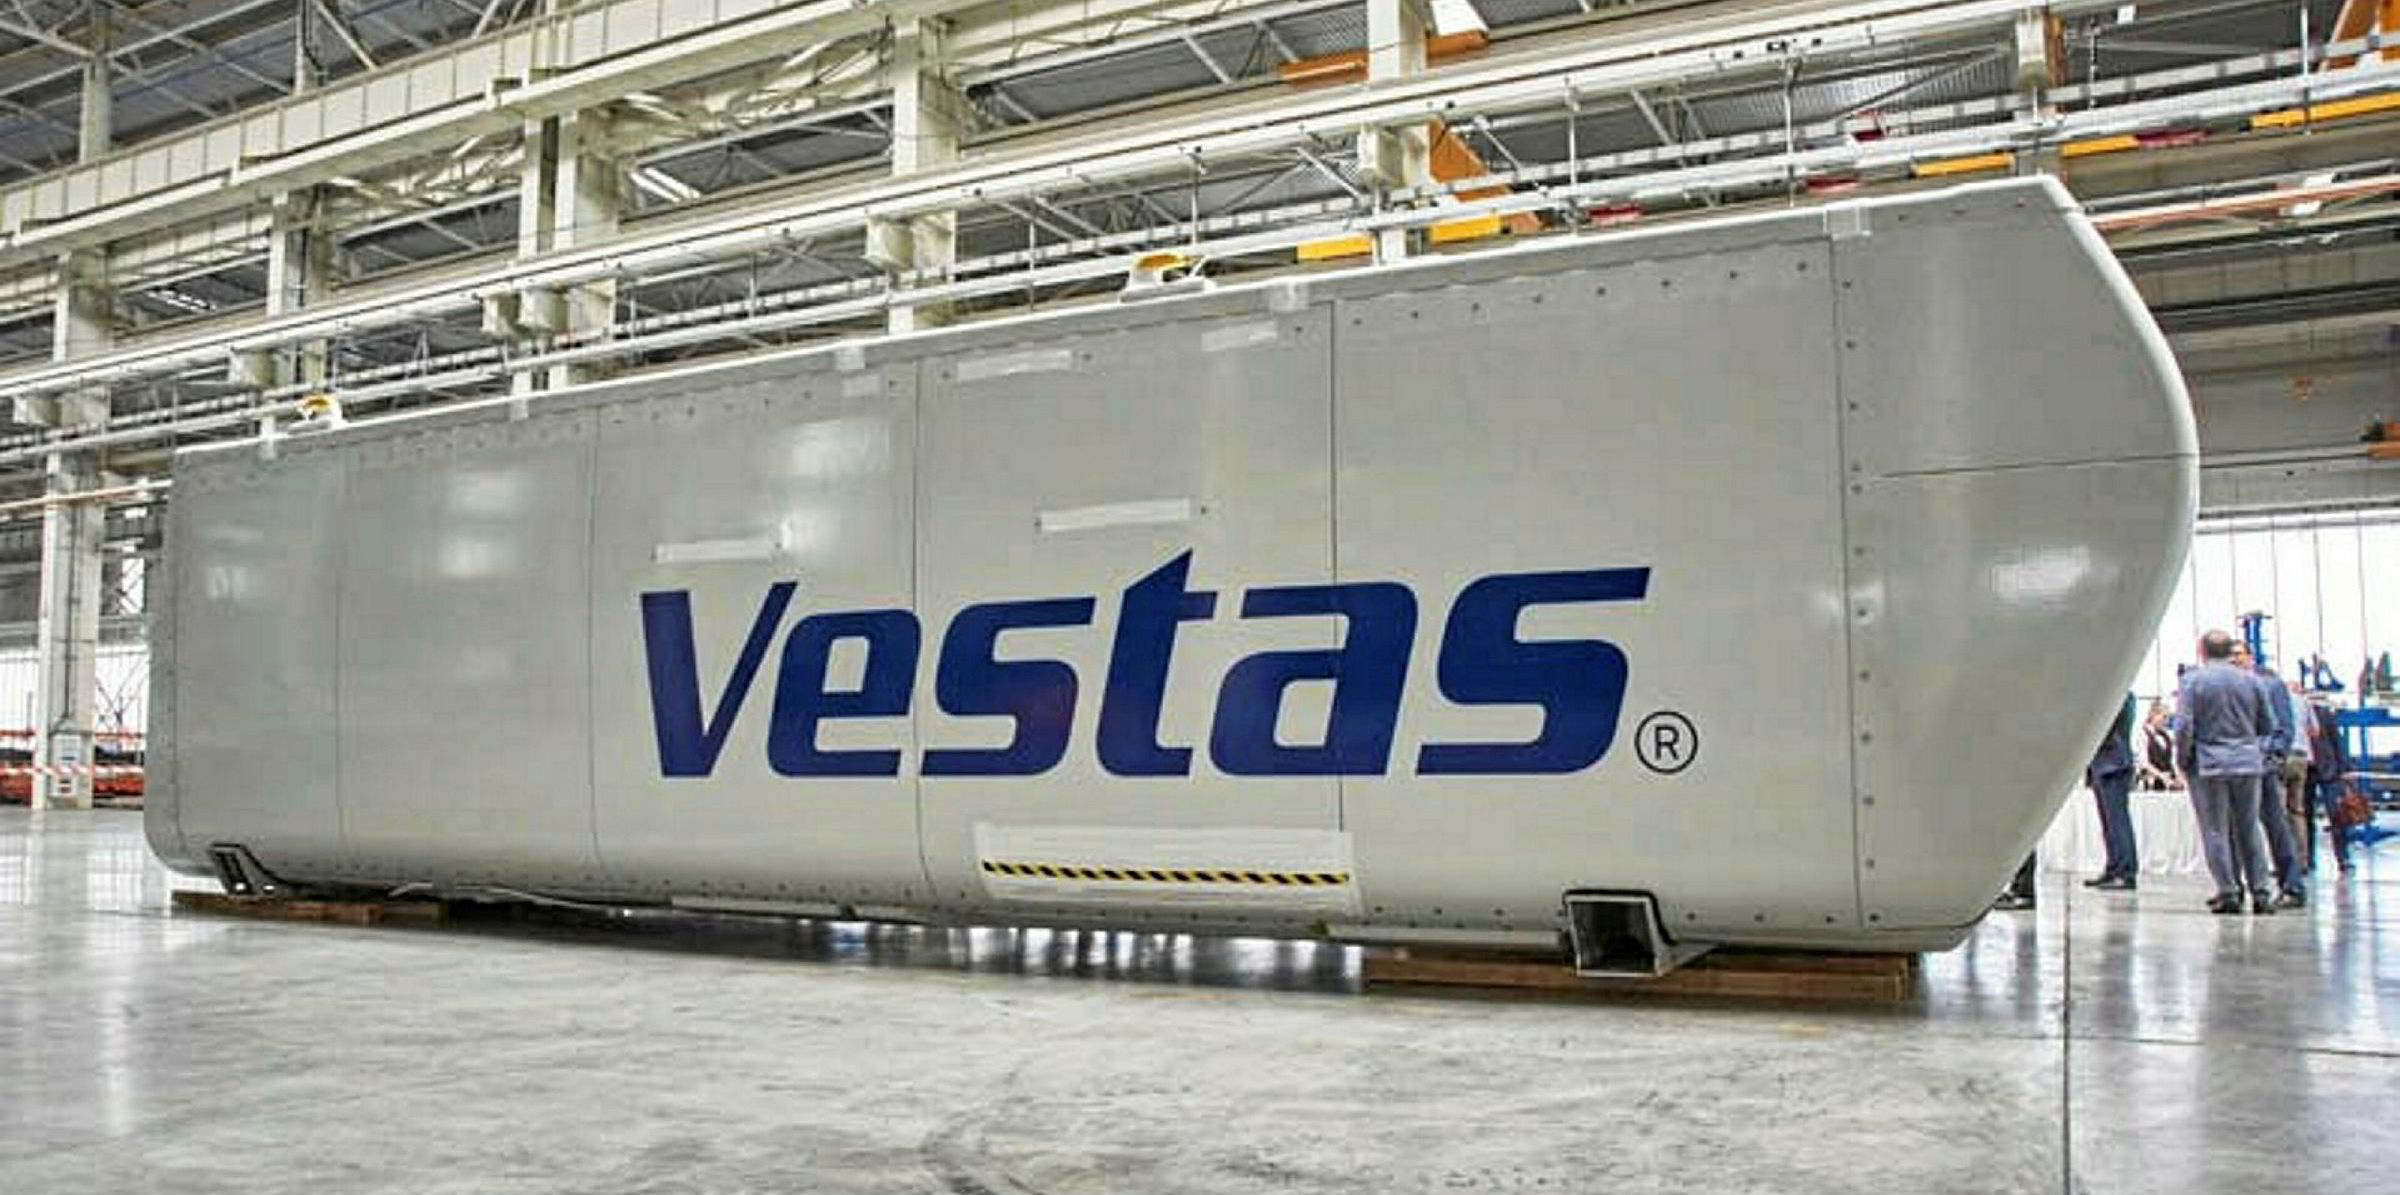 Vestas wants to make India 'global hub' with new wind factory | Recharge